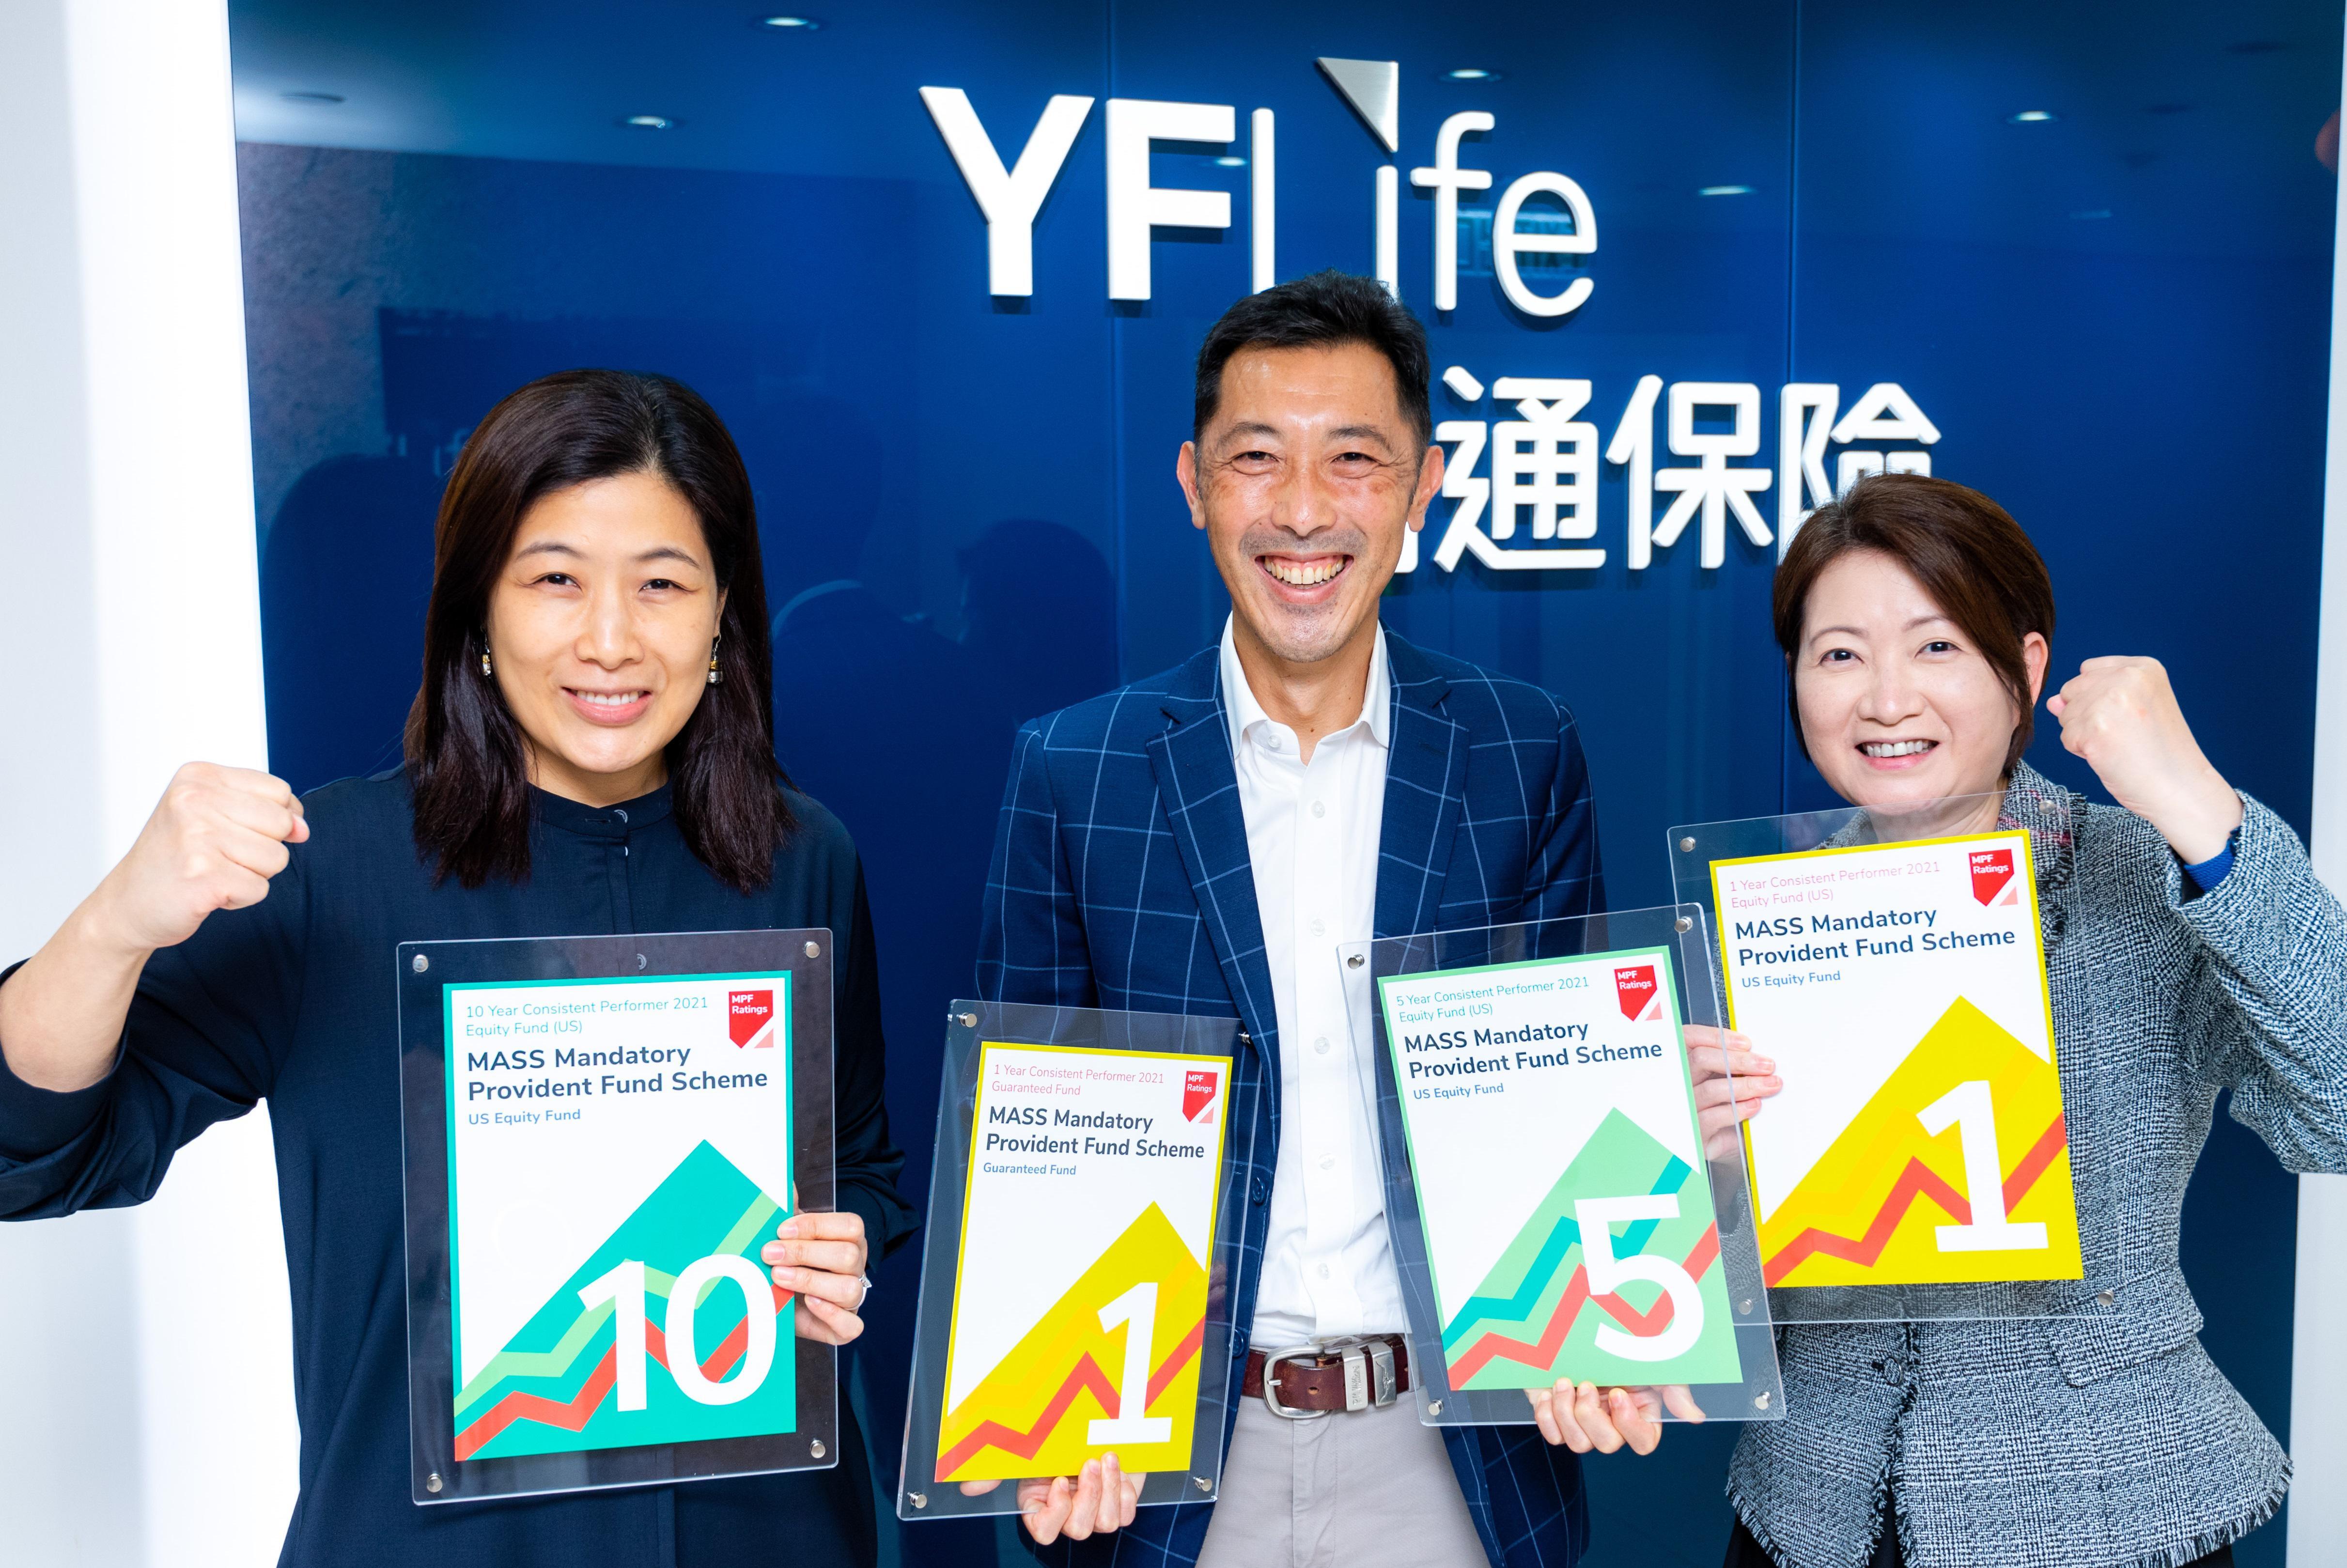 Mr. Francis Chung, Chairman of MPF Ratings (in the middle), presents the four awards of “MPF Ratings Consistent Performers” to Ms. Suki Cheung, Vice President and Head of MPF and Employee Benefits, Institutional Business (on the right).